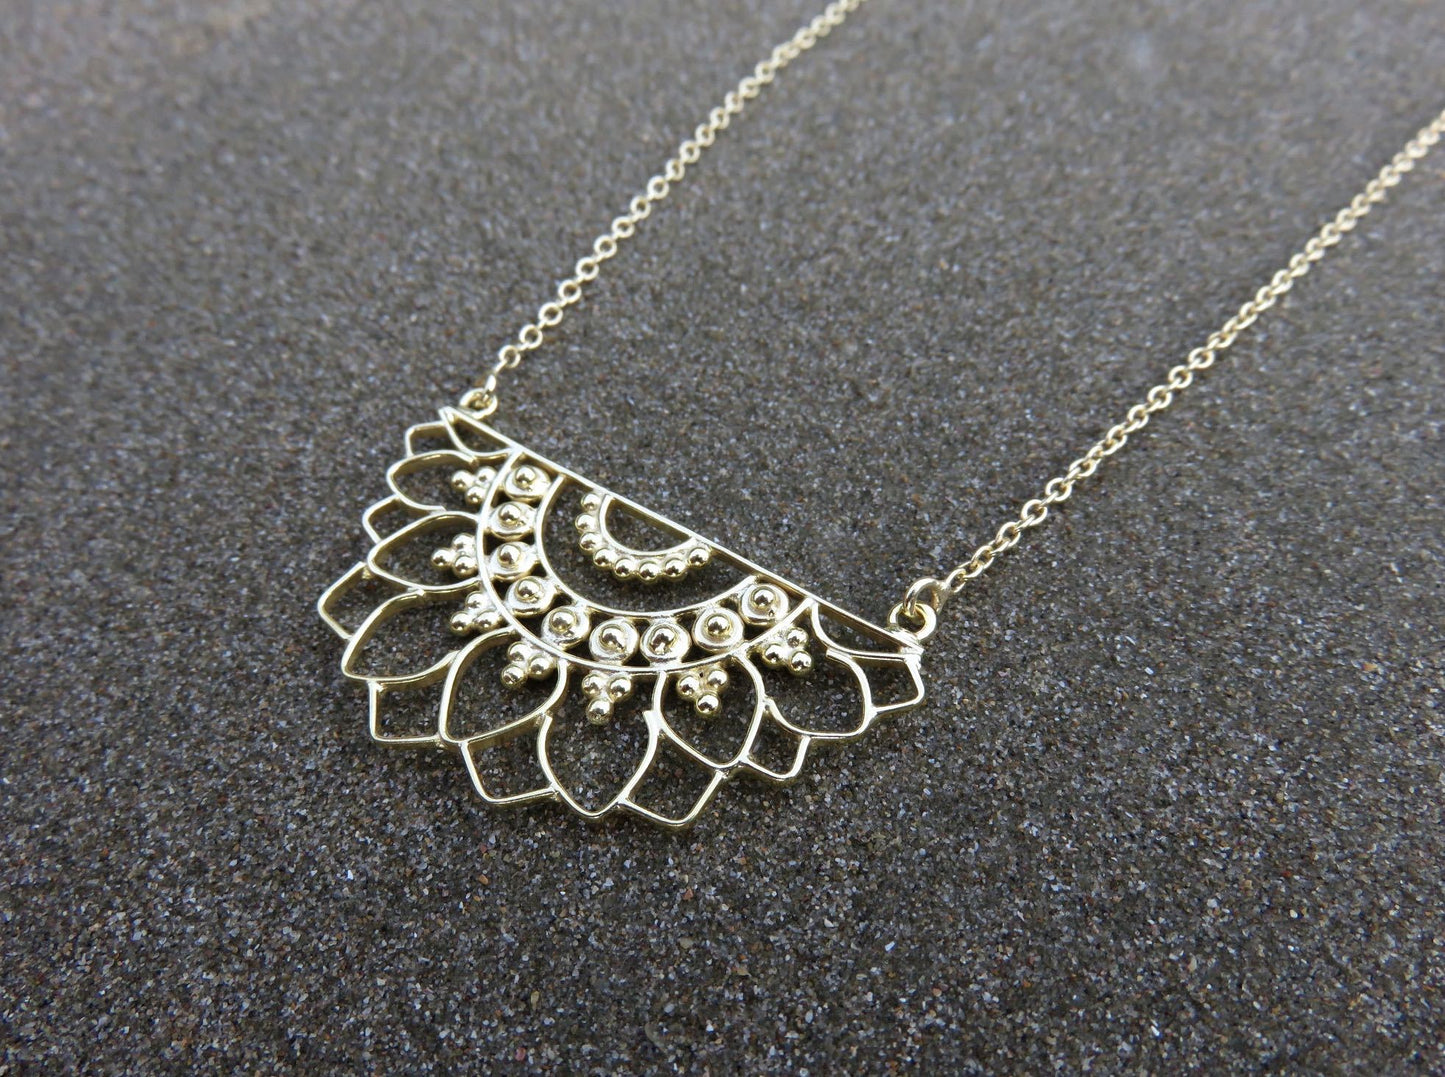 Mandala necklace with floral pattern made of brass 